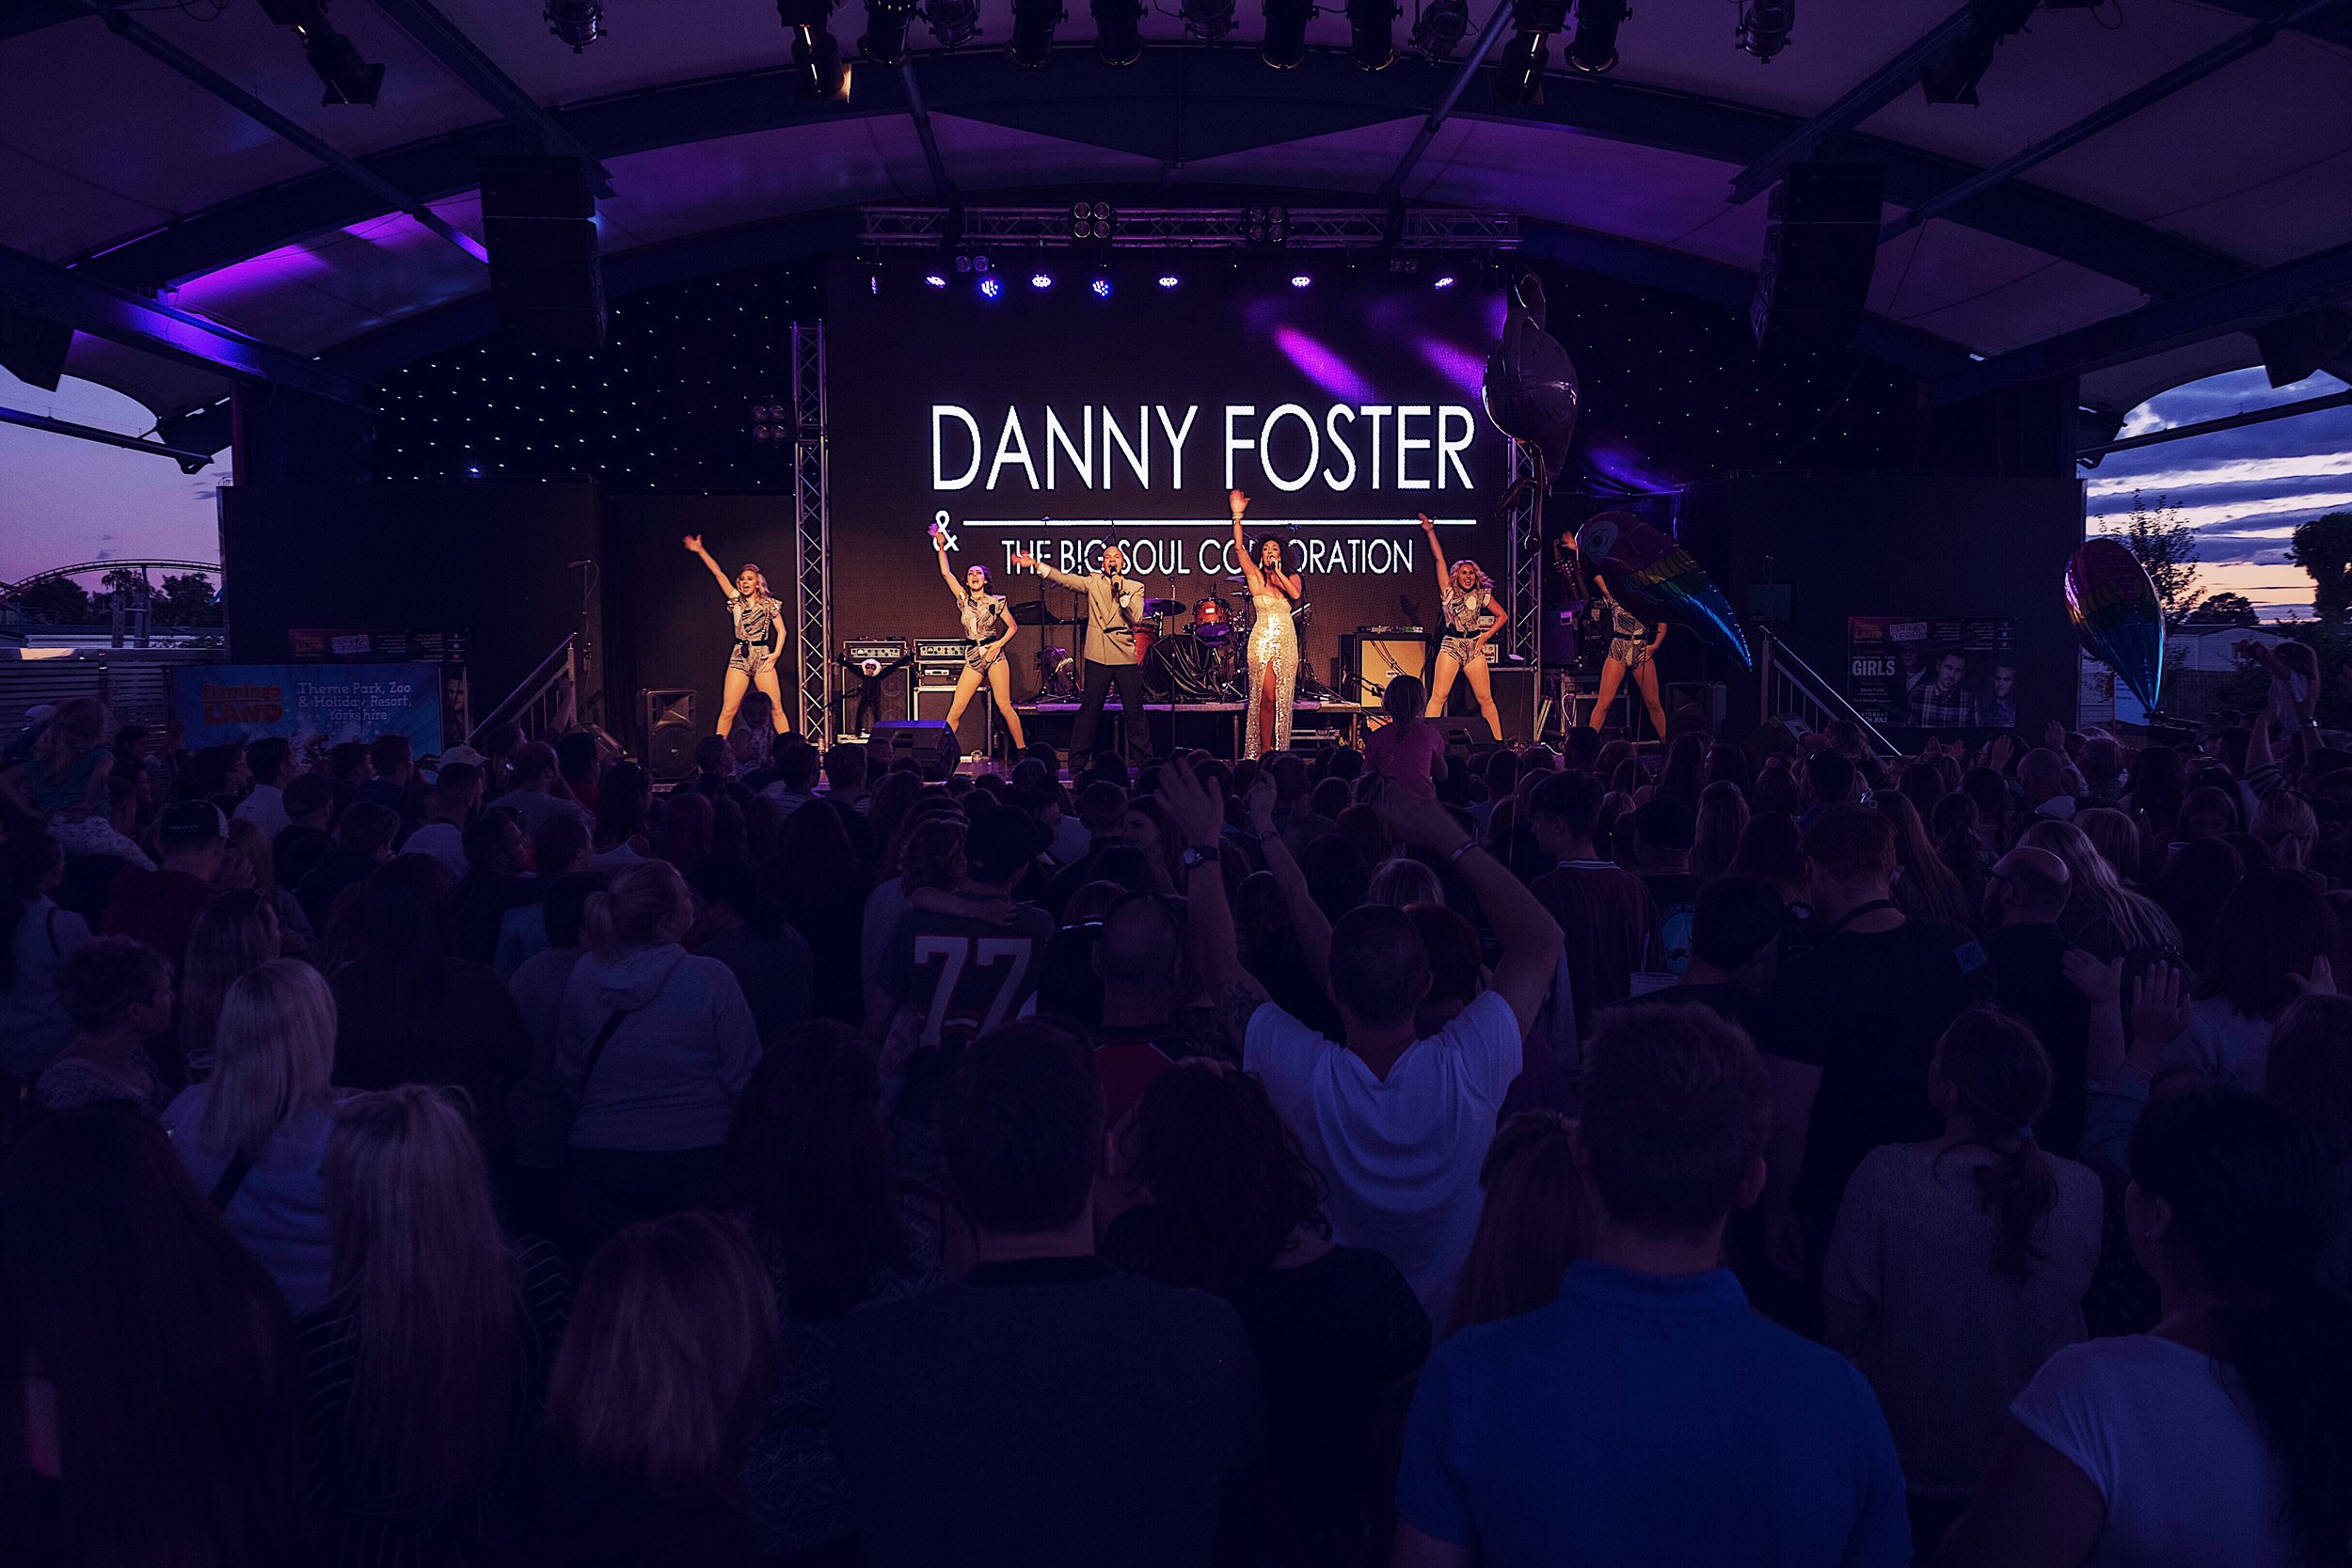 Danny Foster & the BSC_Image13.JPG